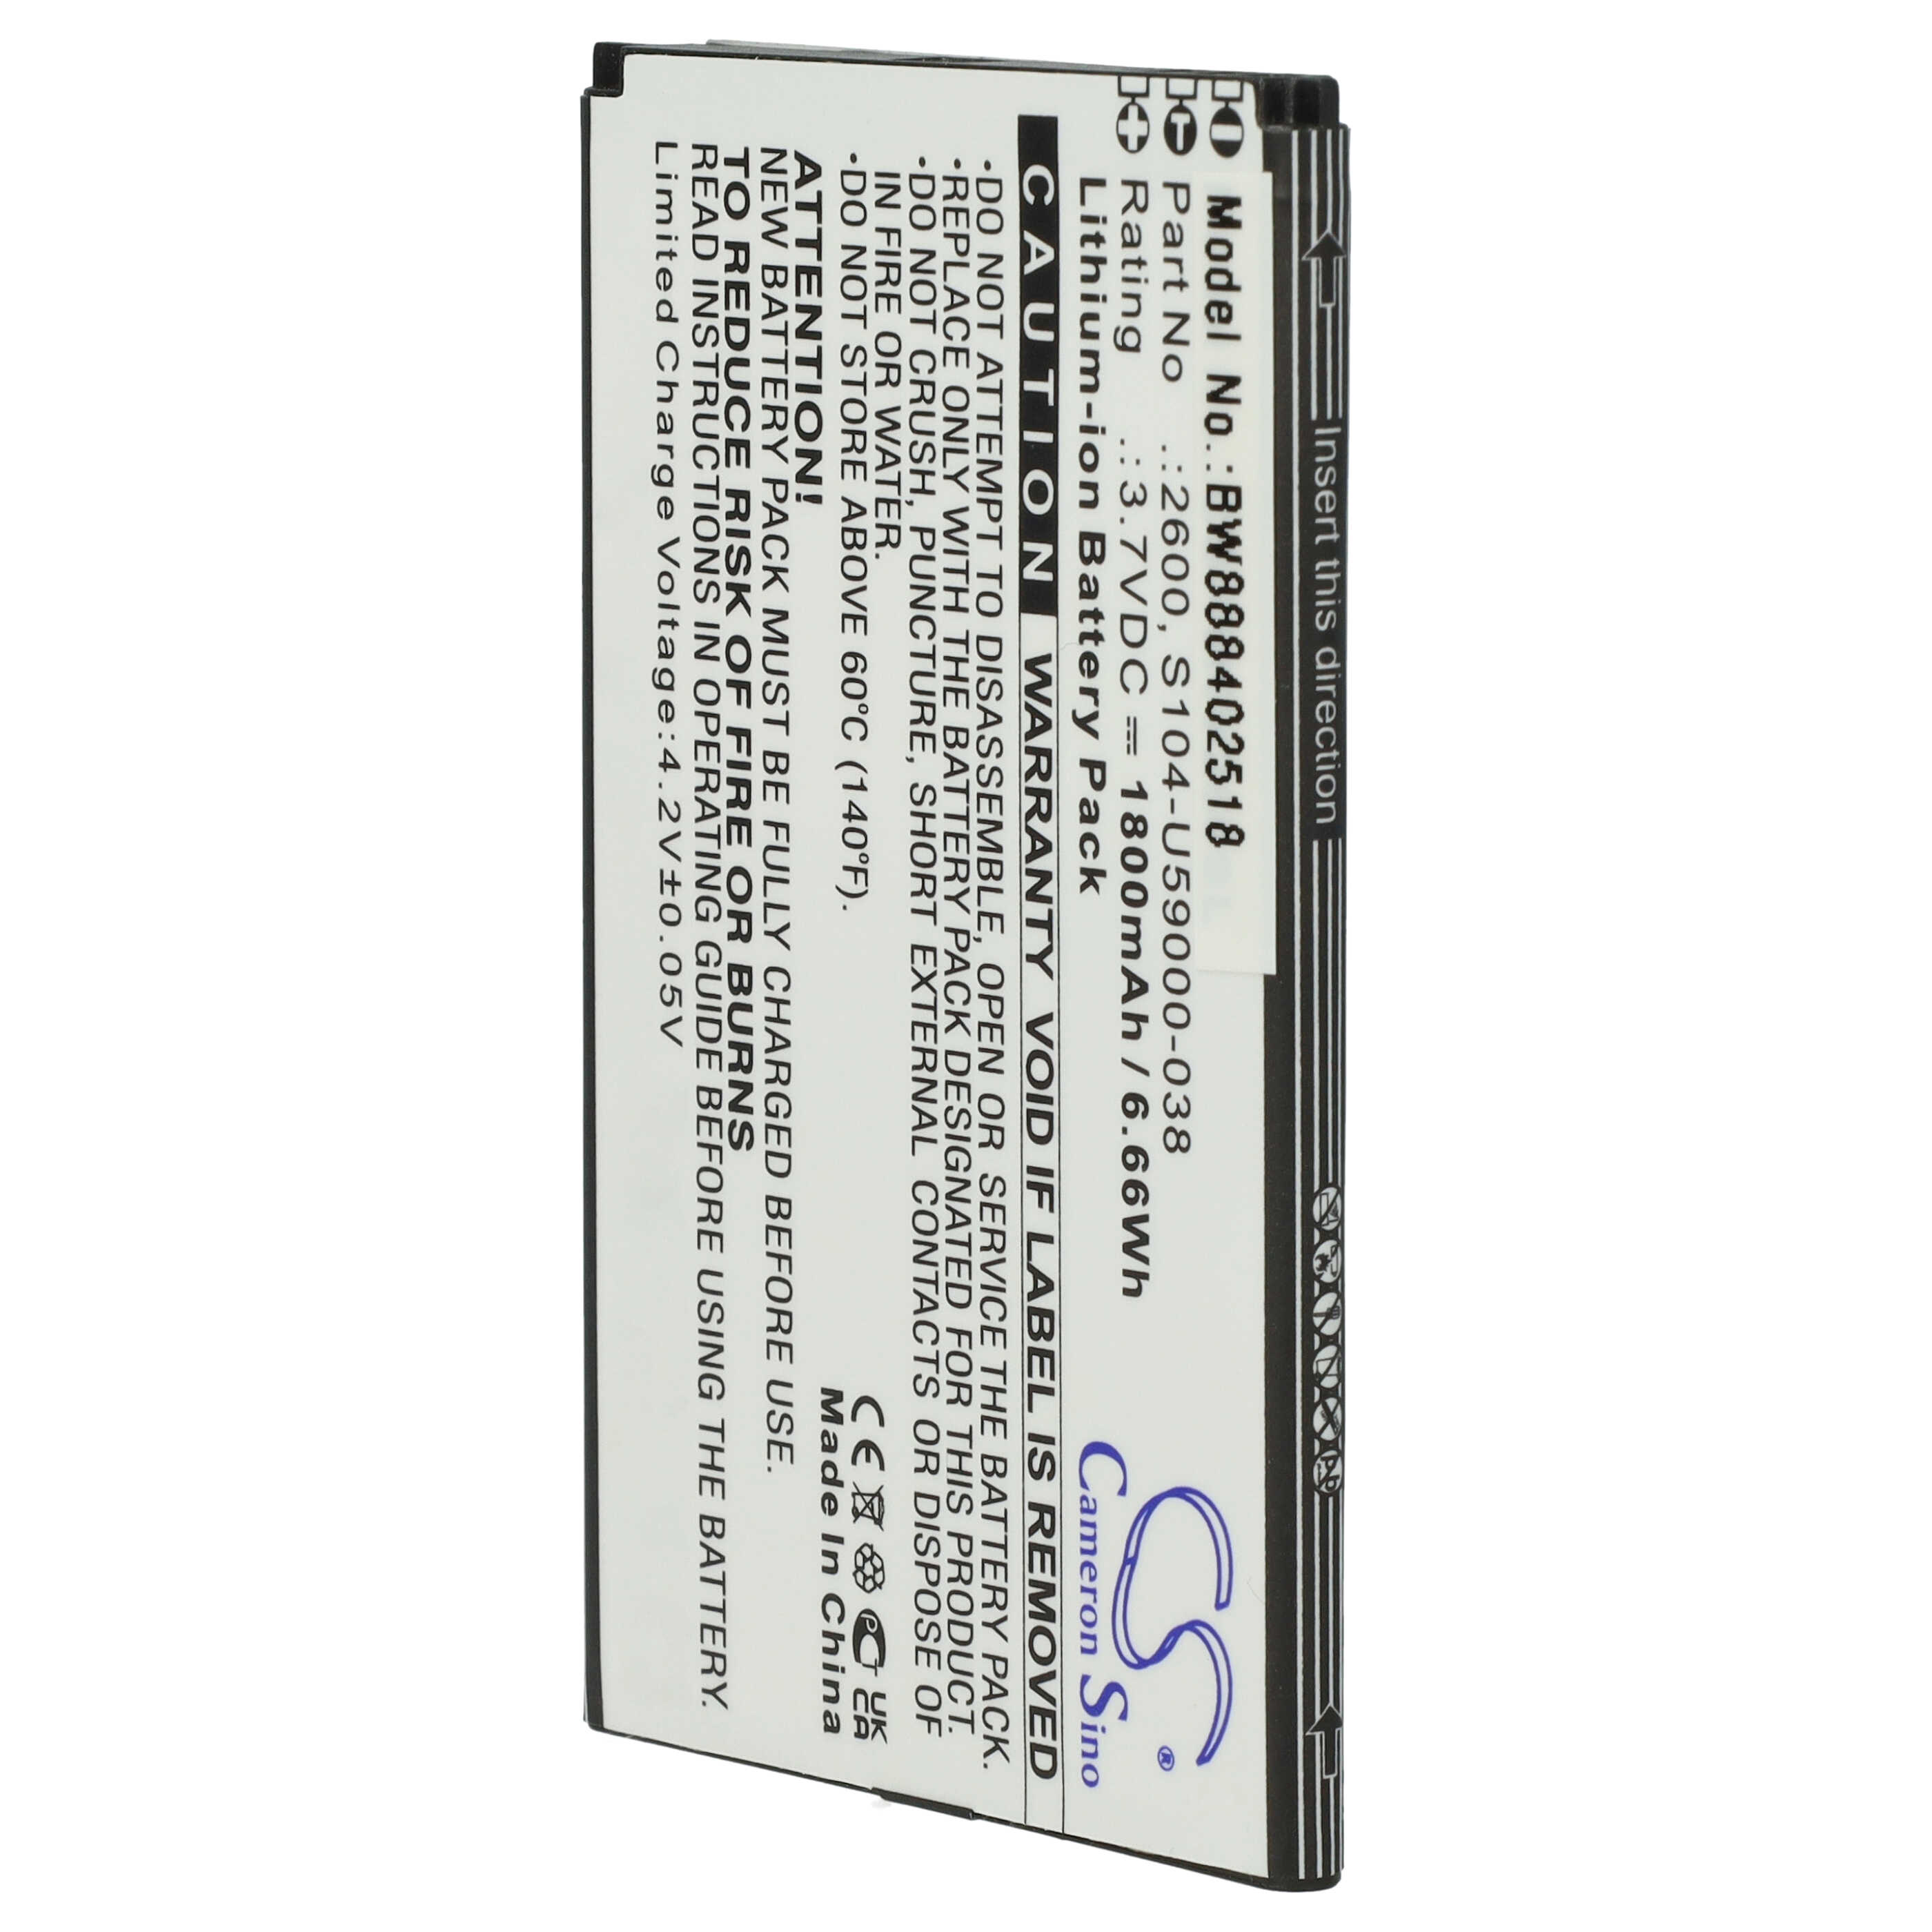 Mobile Phone Battery Replacement for Wiko 2600, S104-U59000-038 - 1800mAh 3.7V Li-Ion